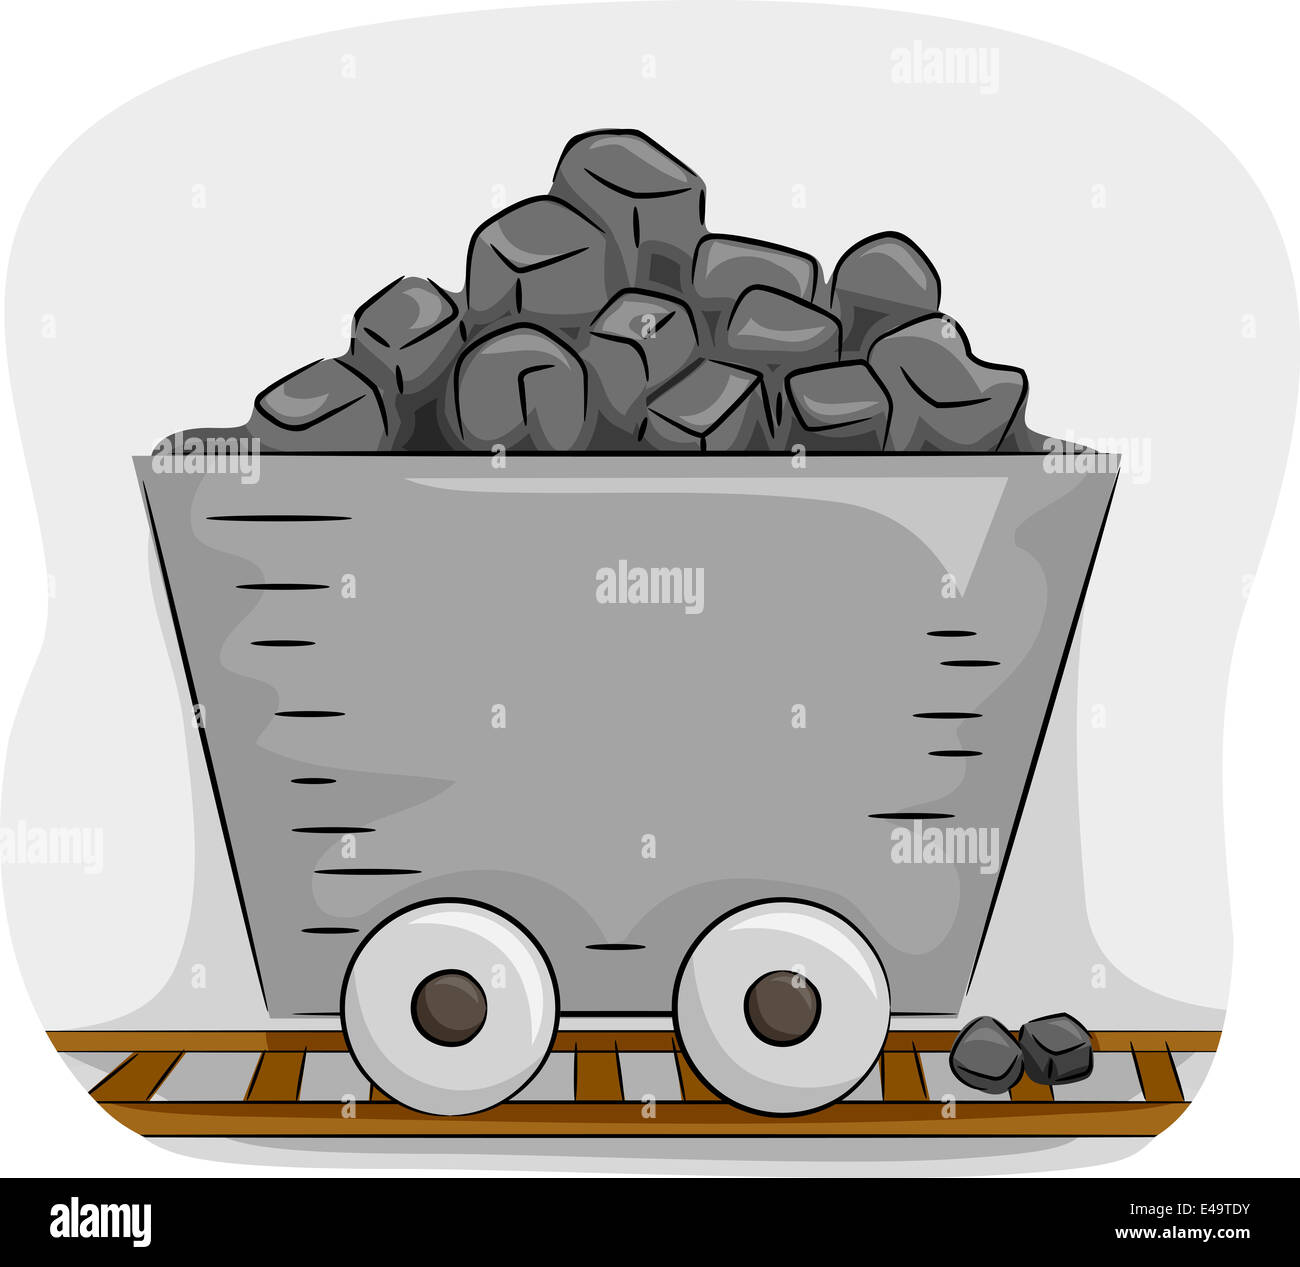 Illustration Featuring a Mine Trolley Full of Coal Stock Photo